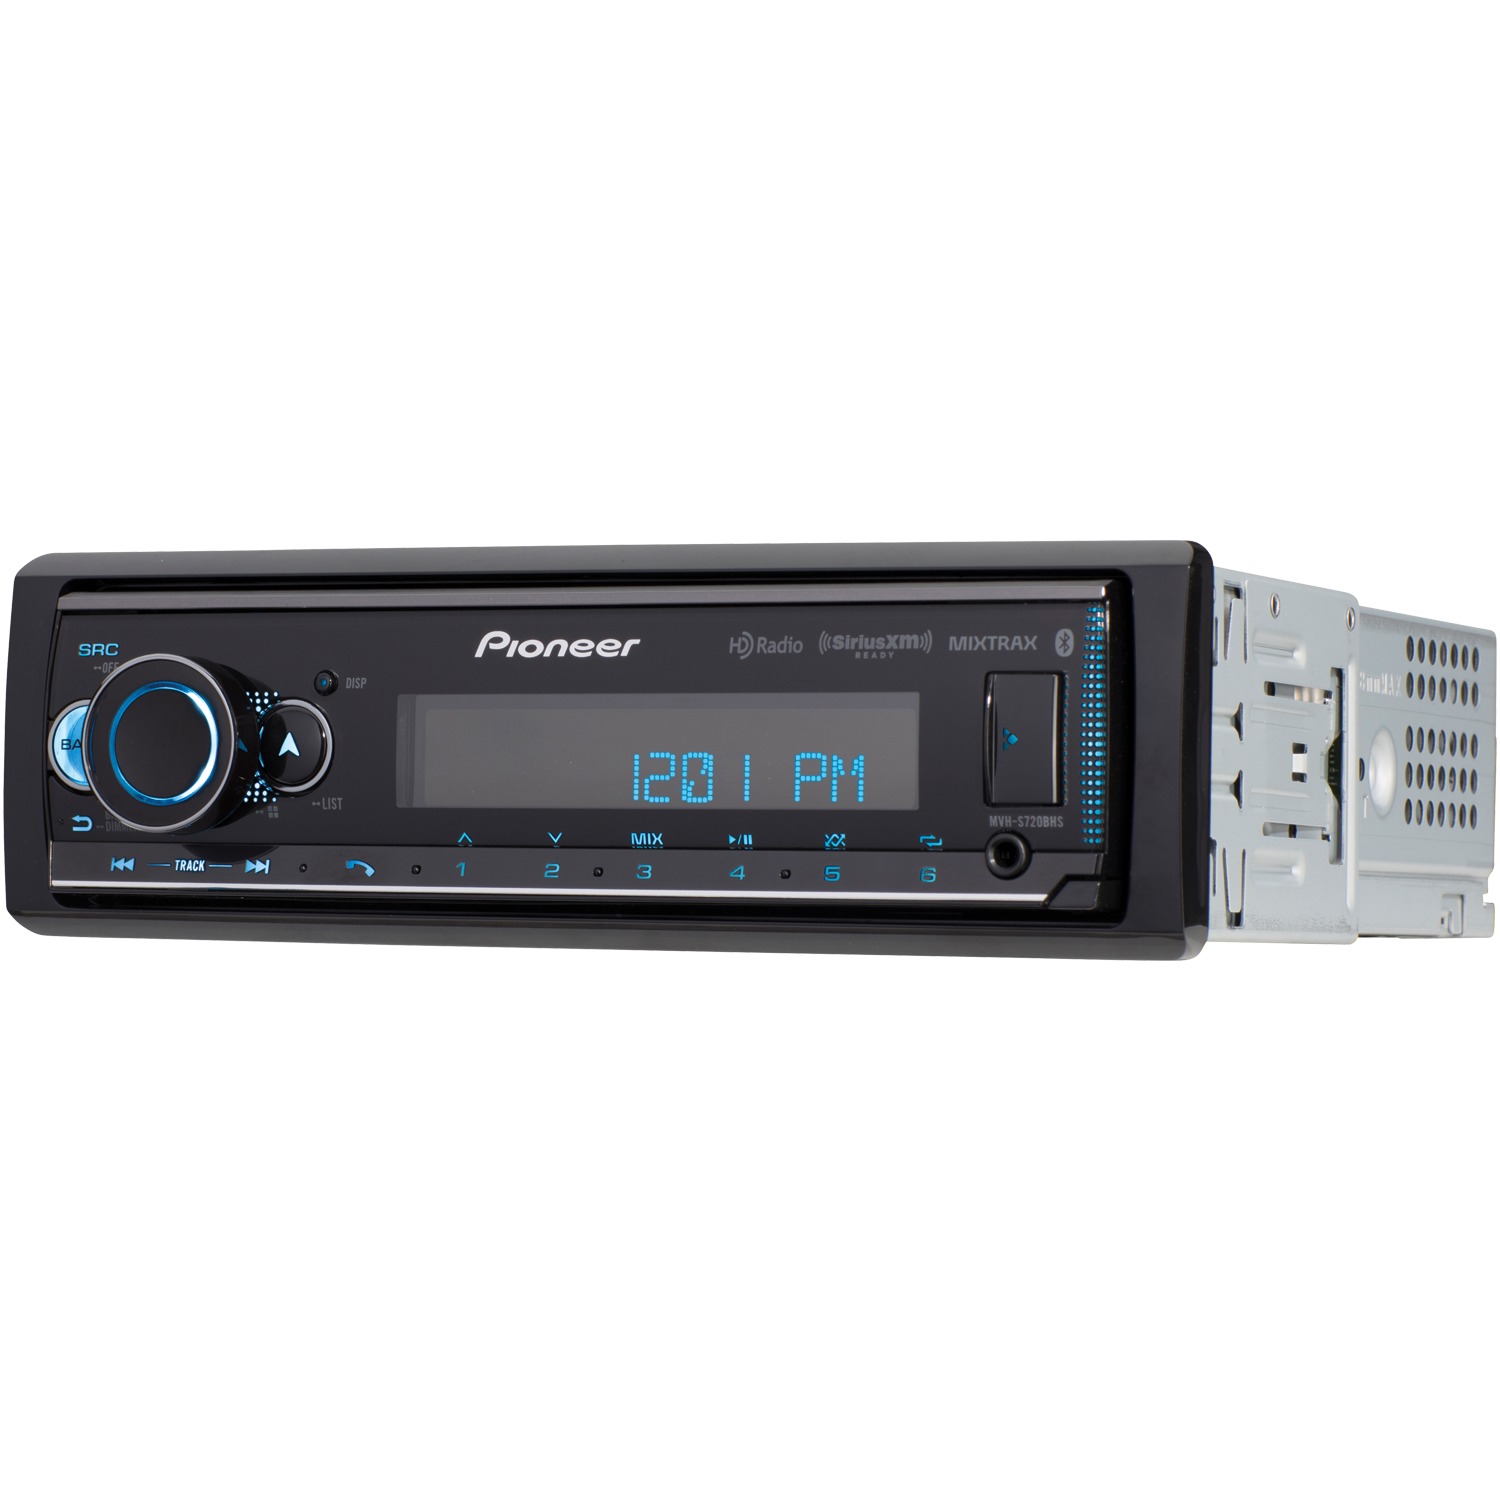 Pioneer MVH-S720BHS Double-Din in-Dash Digital Media Receiver with Bluetooth, HD Radio, and SiriusXM Ready and TS-A4670F A-Series Coaxial Speaker System (4 Way, 4" x 6") - image 4 of 17